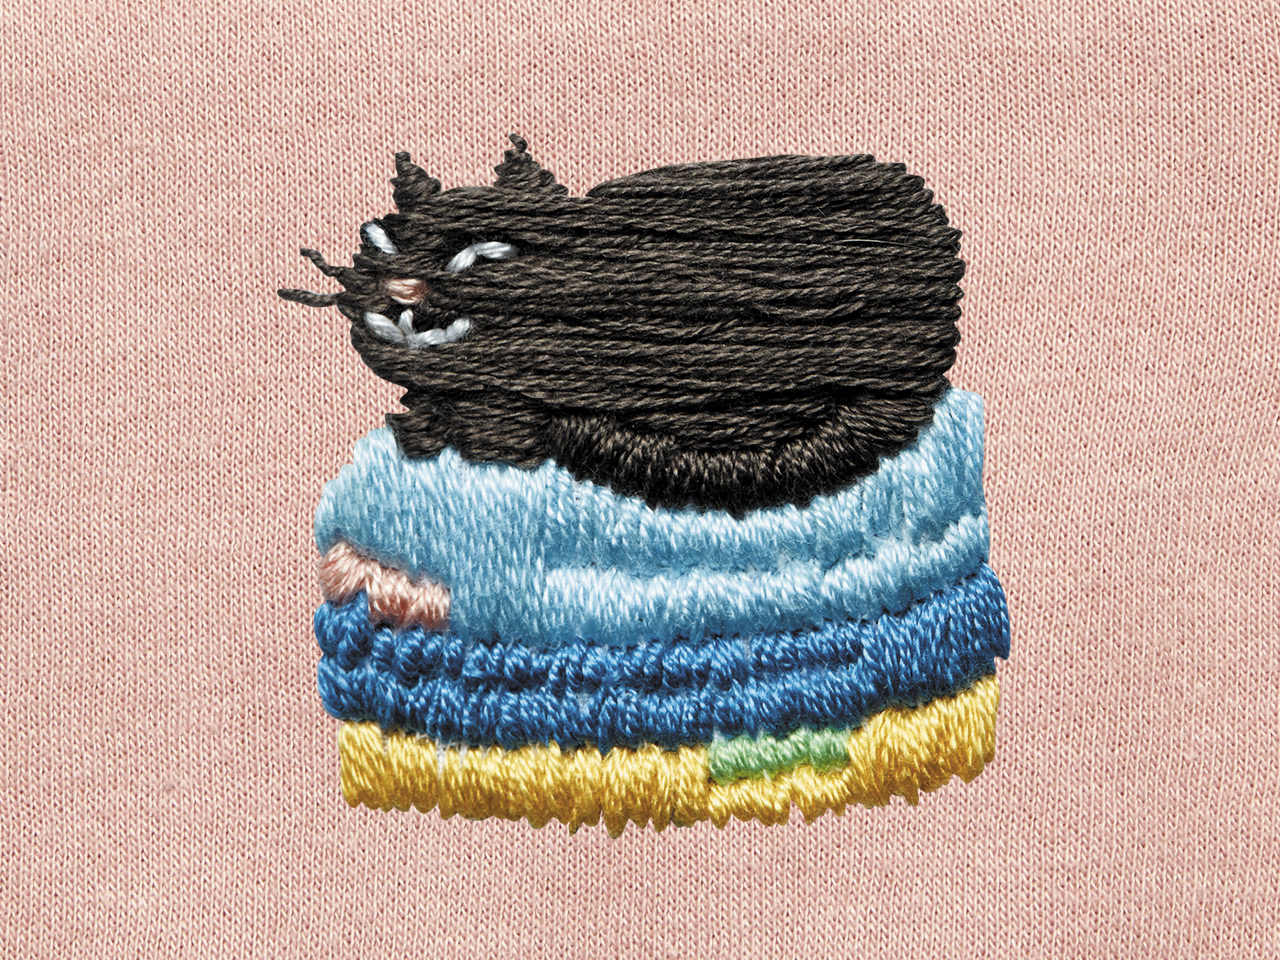 A photo of an embroidery of a black cat sitting on top of a laundry pile against a pink fabric background.